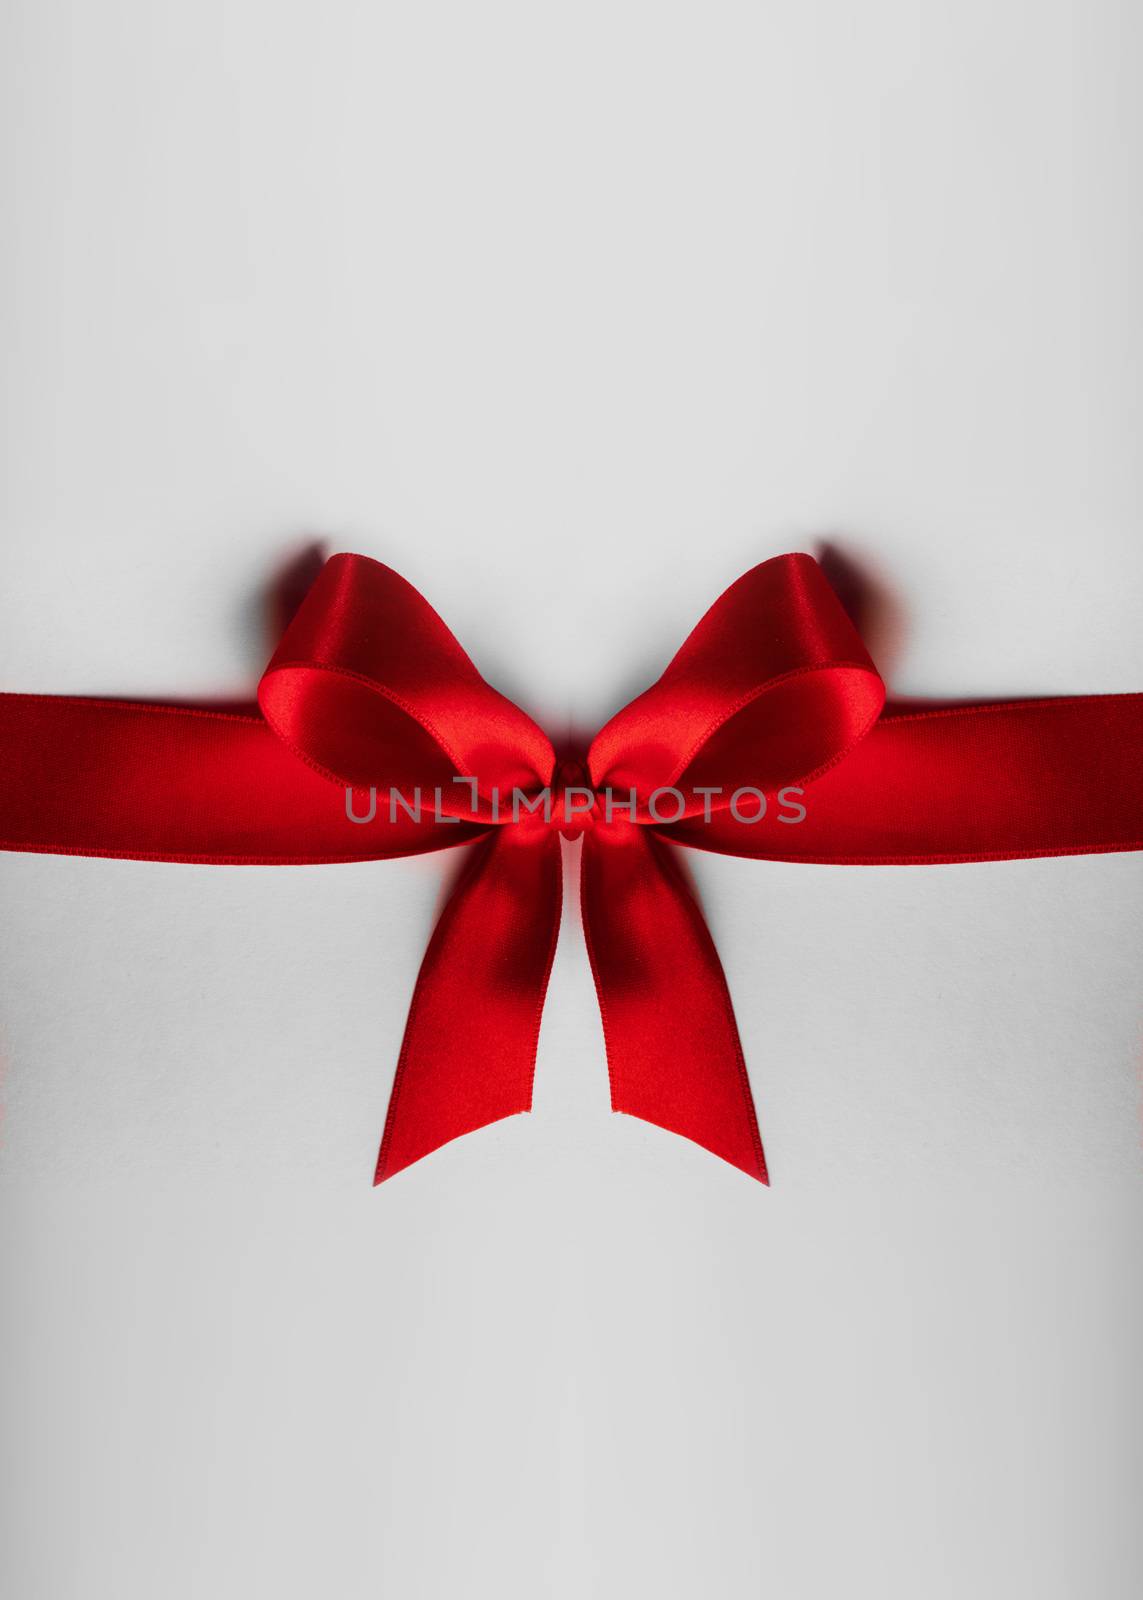 Red bow on white by Yellowj